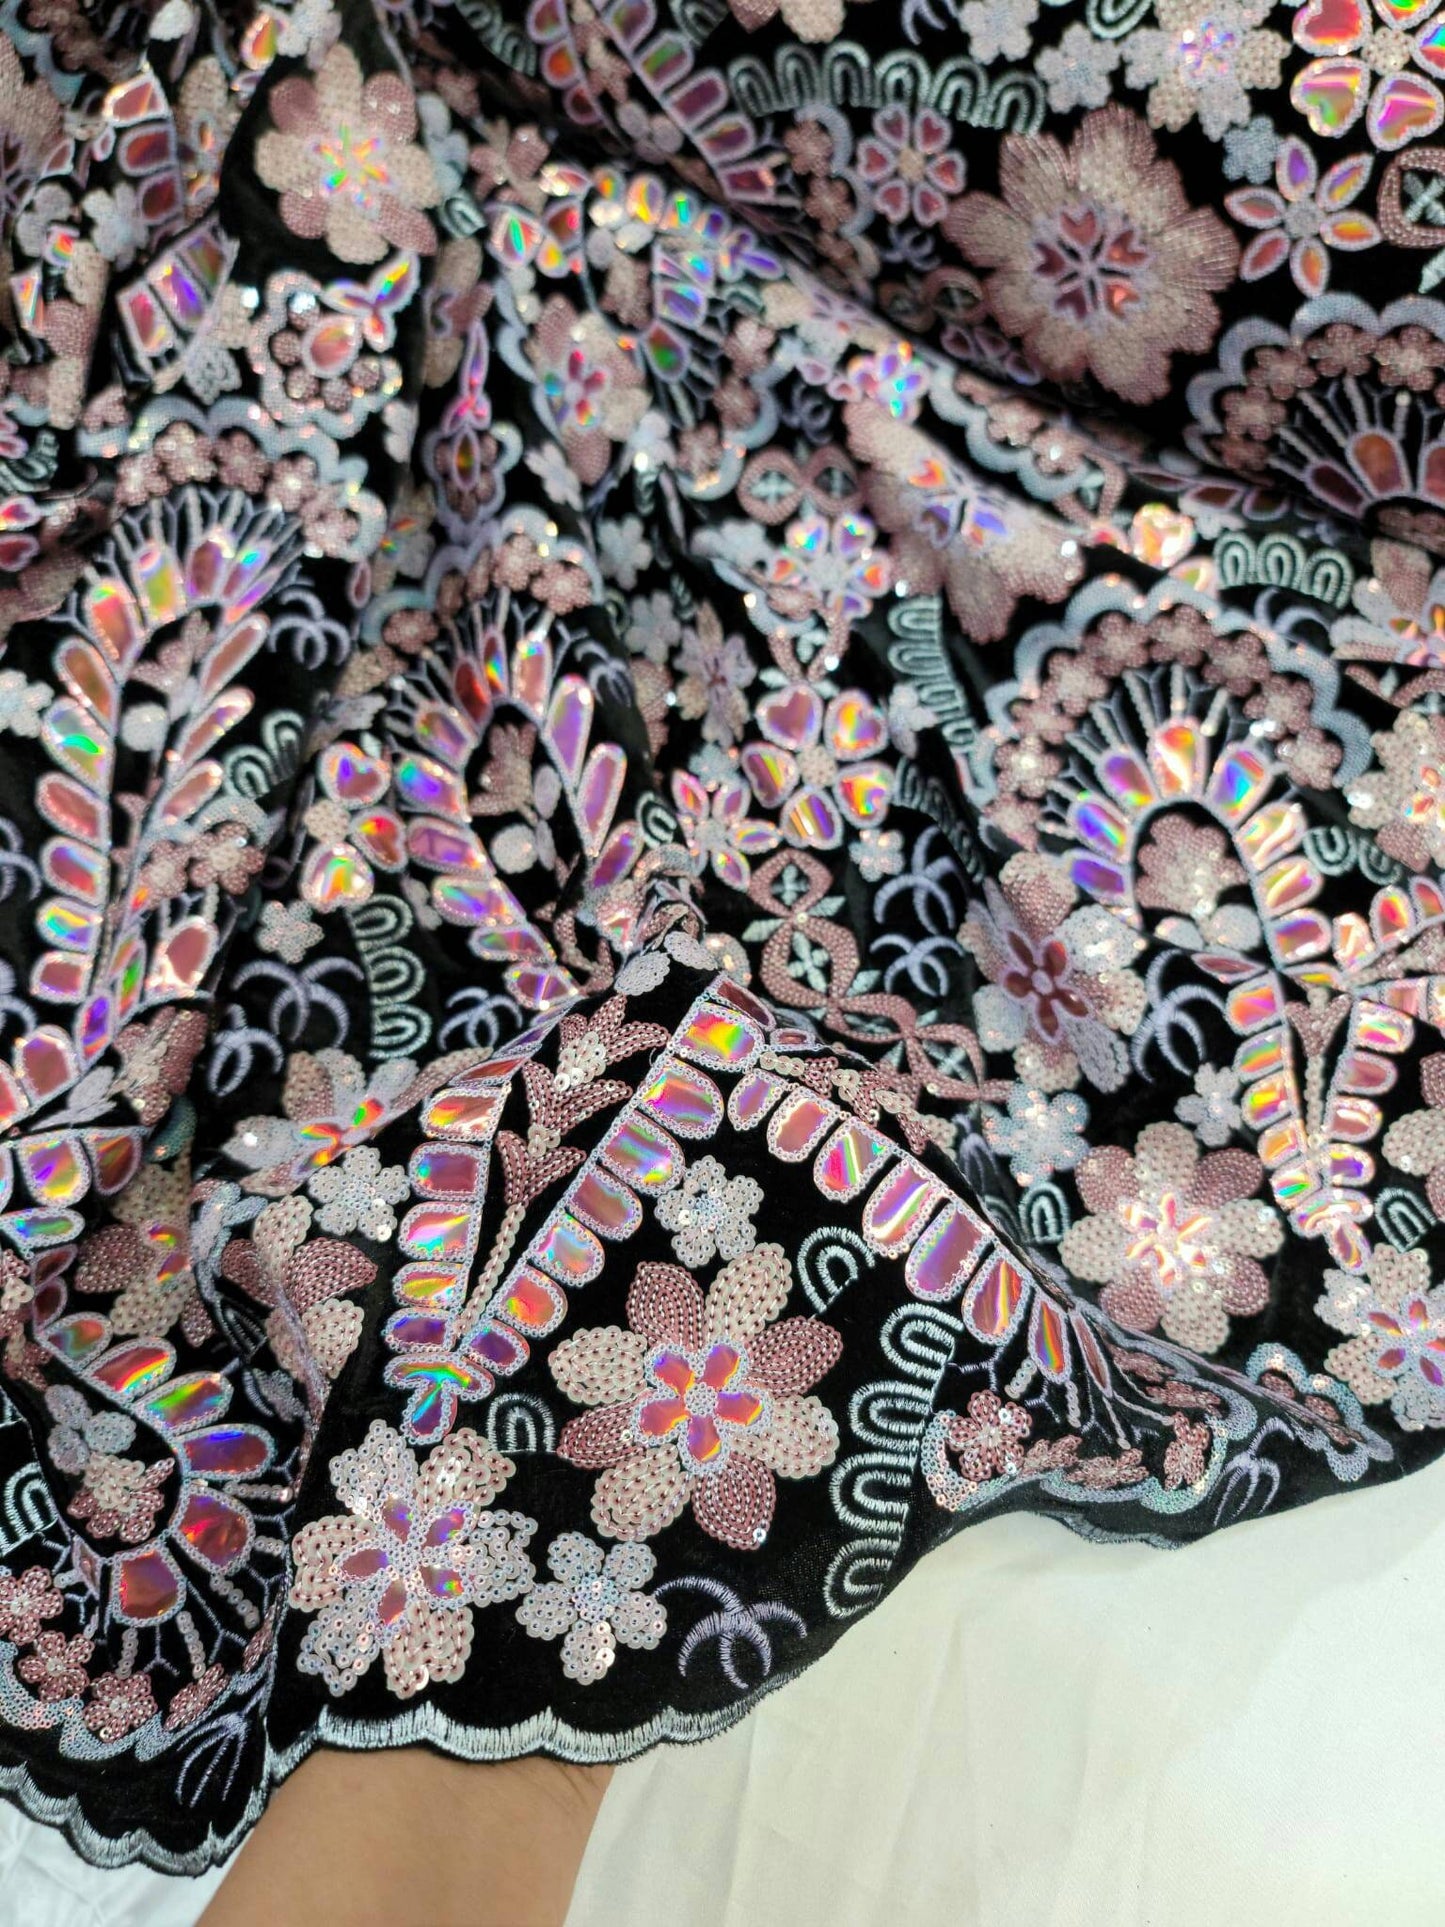 Black Lace Pink Embroidered Flowers Floral Sequin On Black Velvet Prom Fabric Sold By The Yard Quinceañera Bridal Evening  Fashion